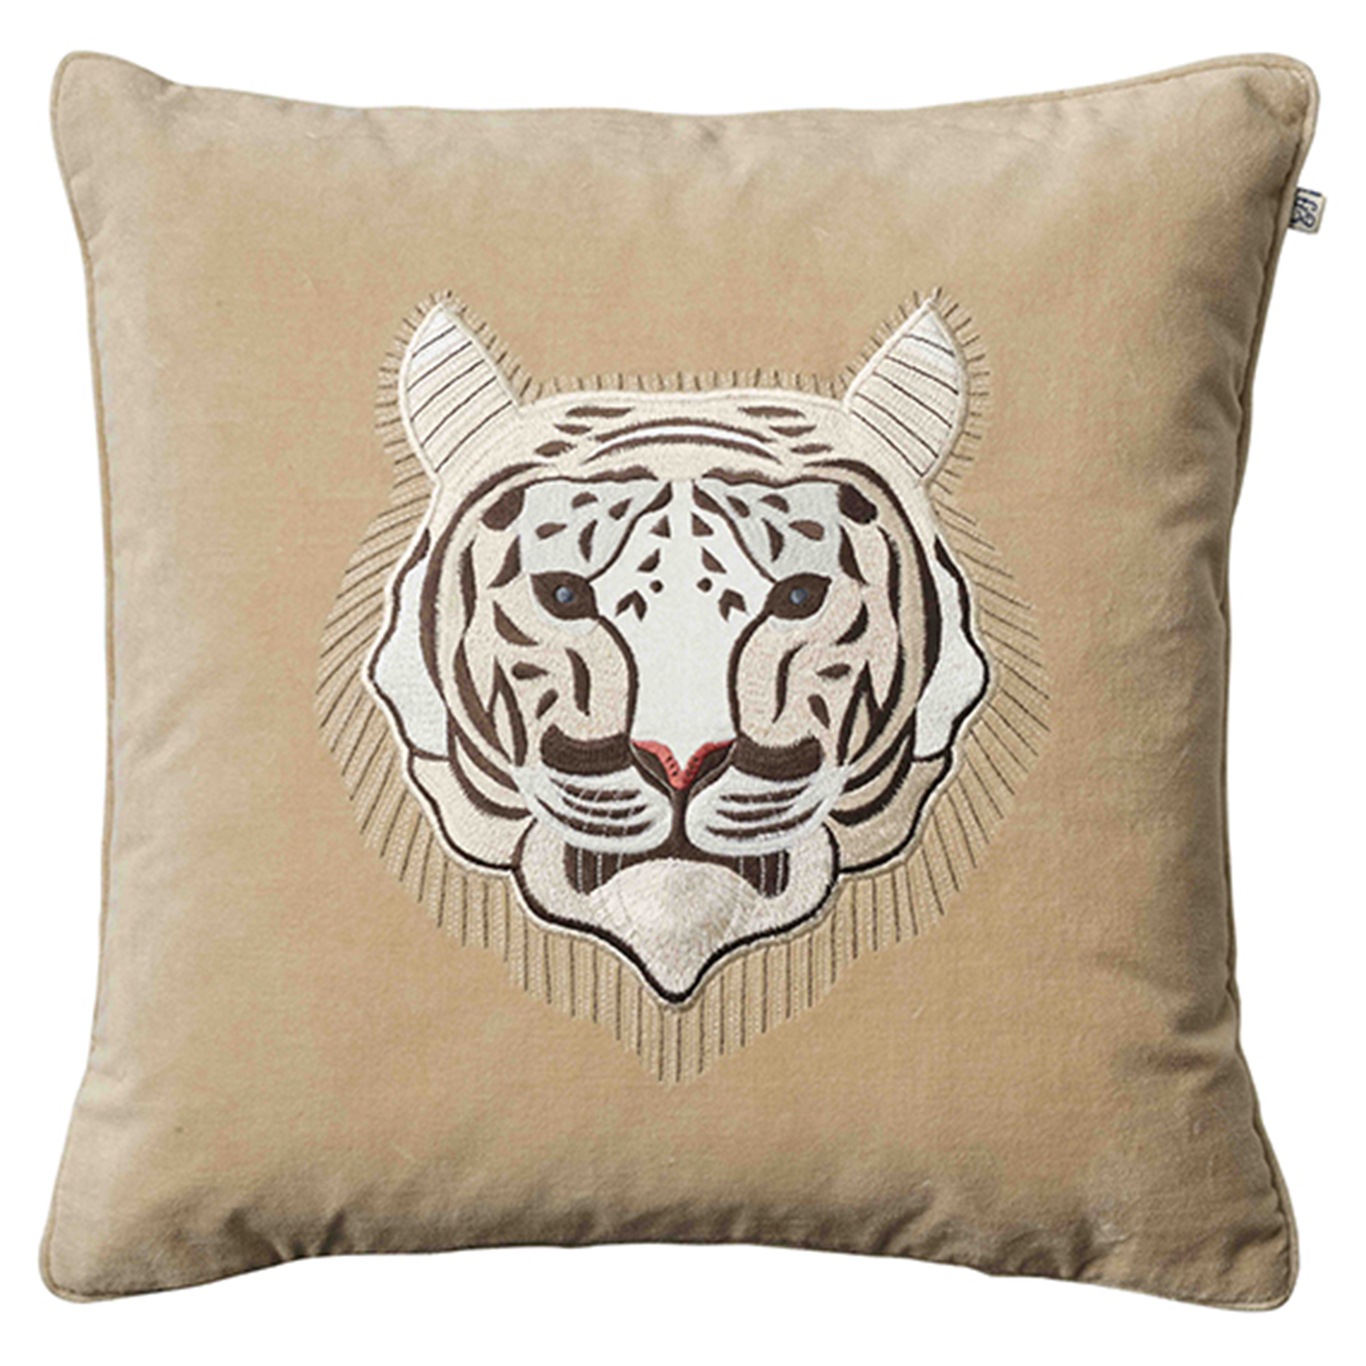 Embroidered White Tiger Cushion Cover, 50x50 cm